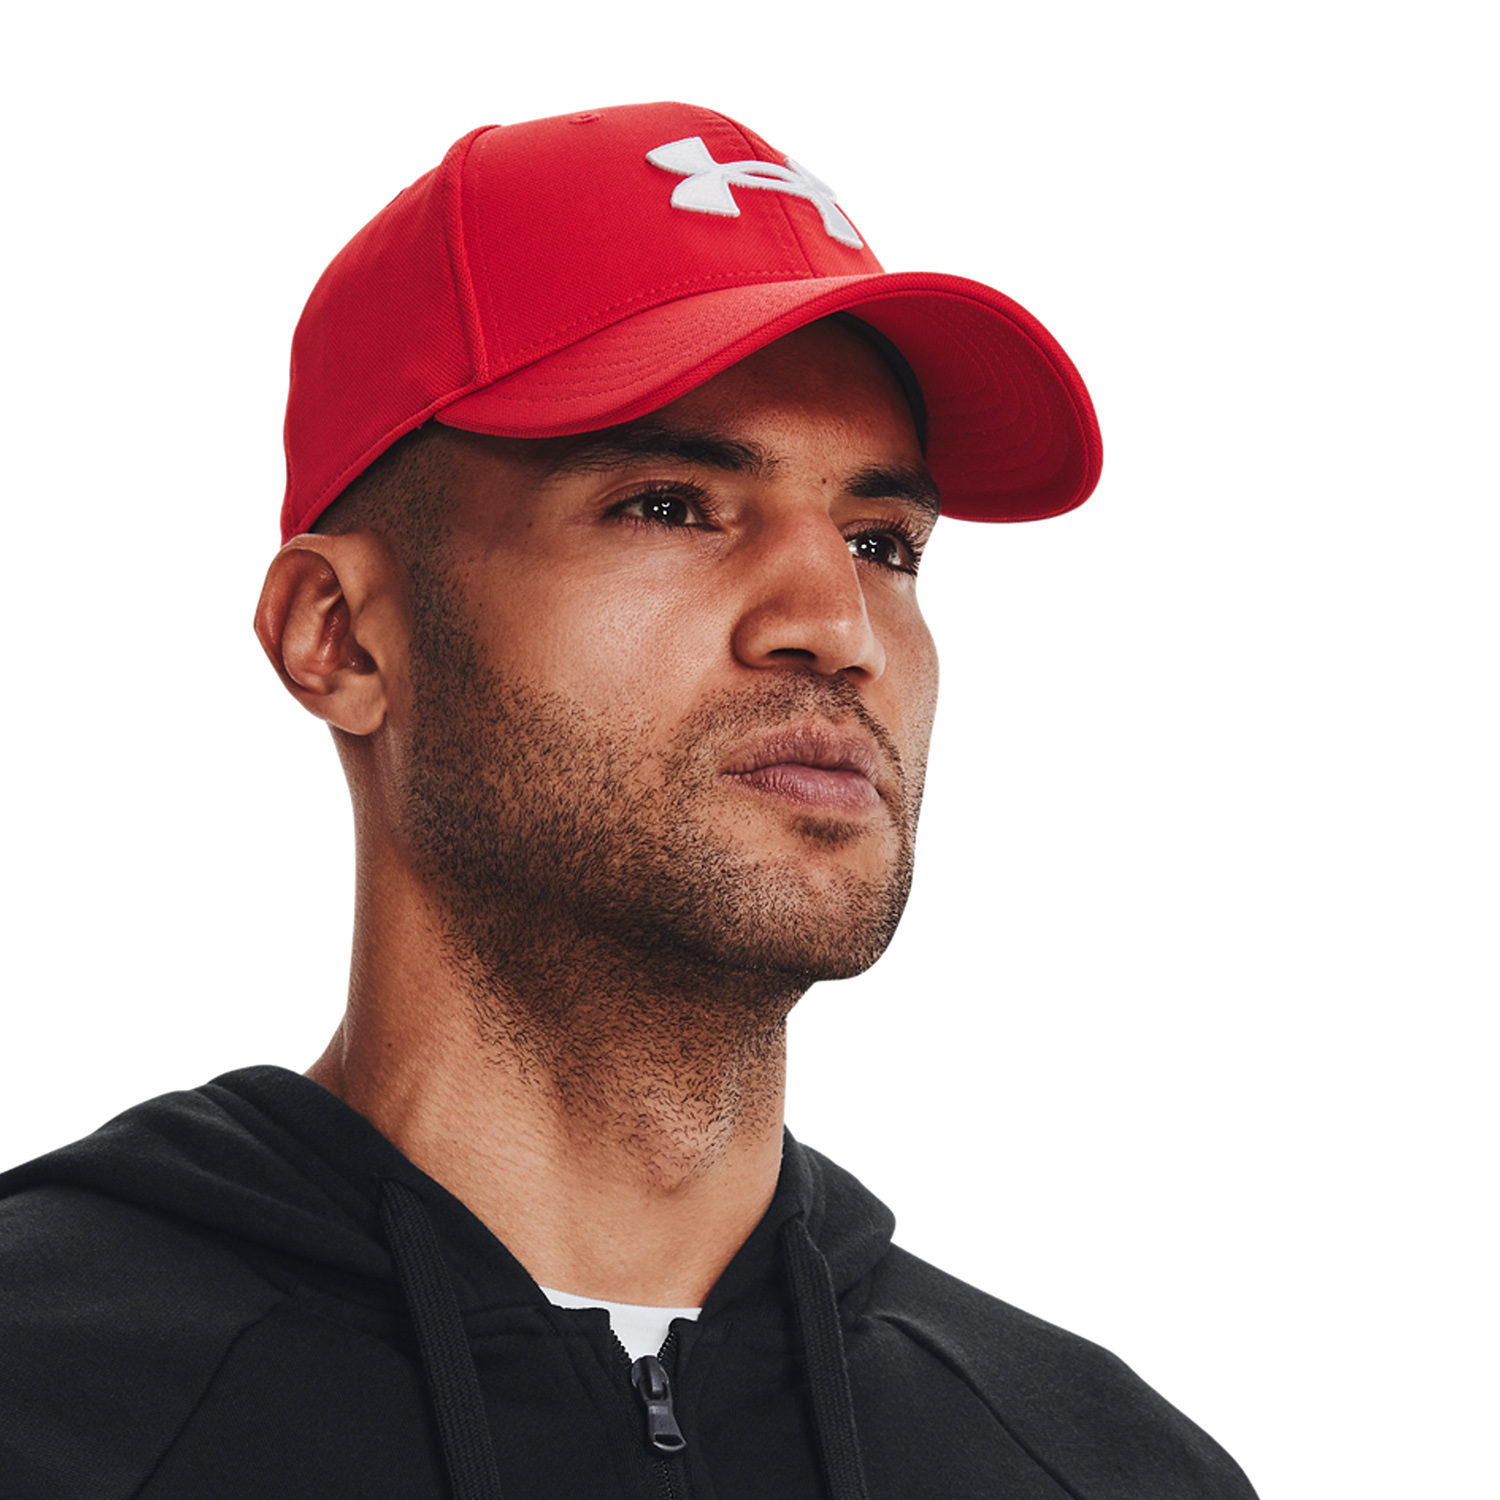 Under Armour Blitzing Cappello - Red/White